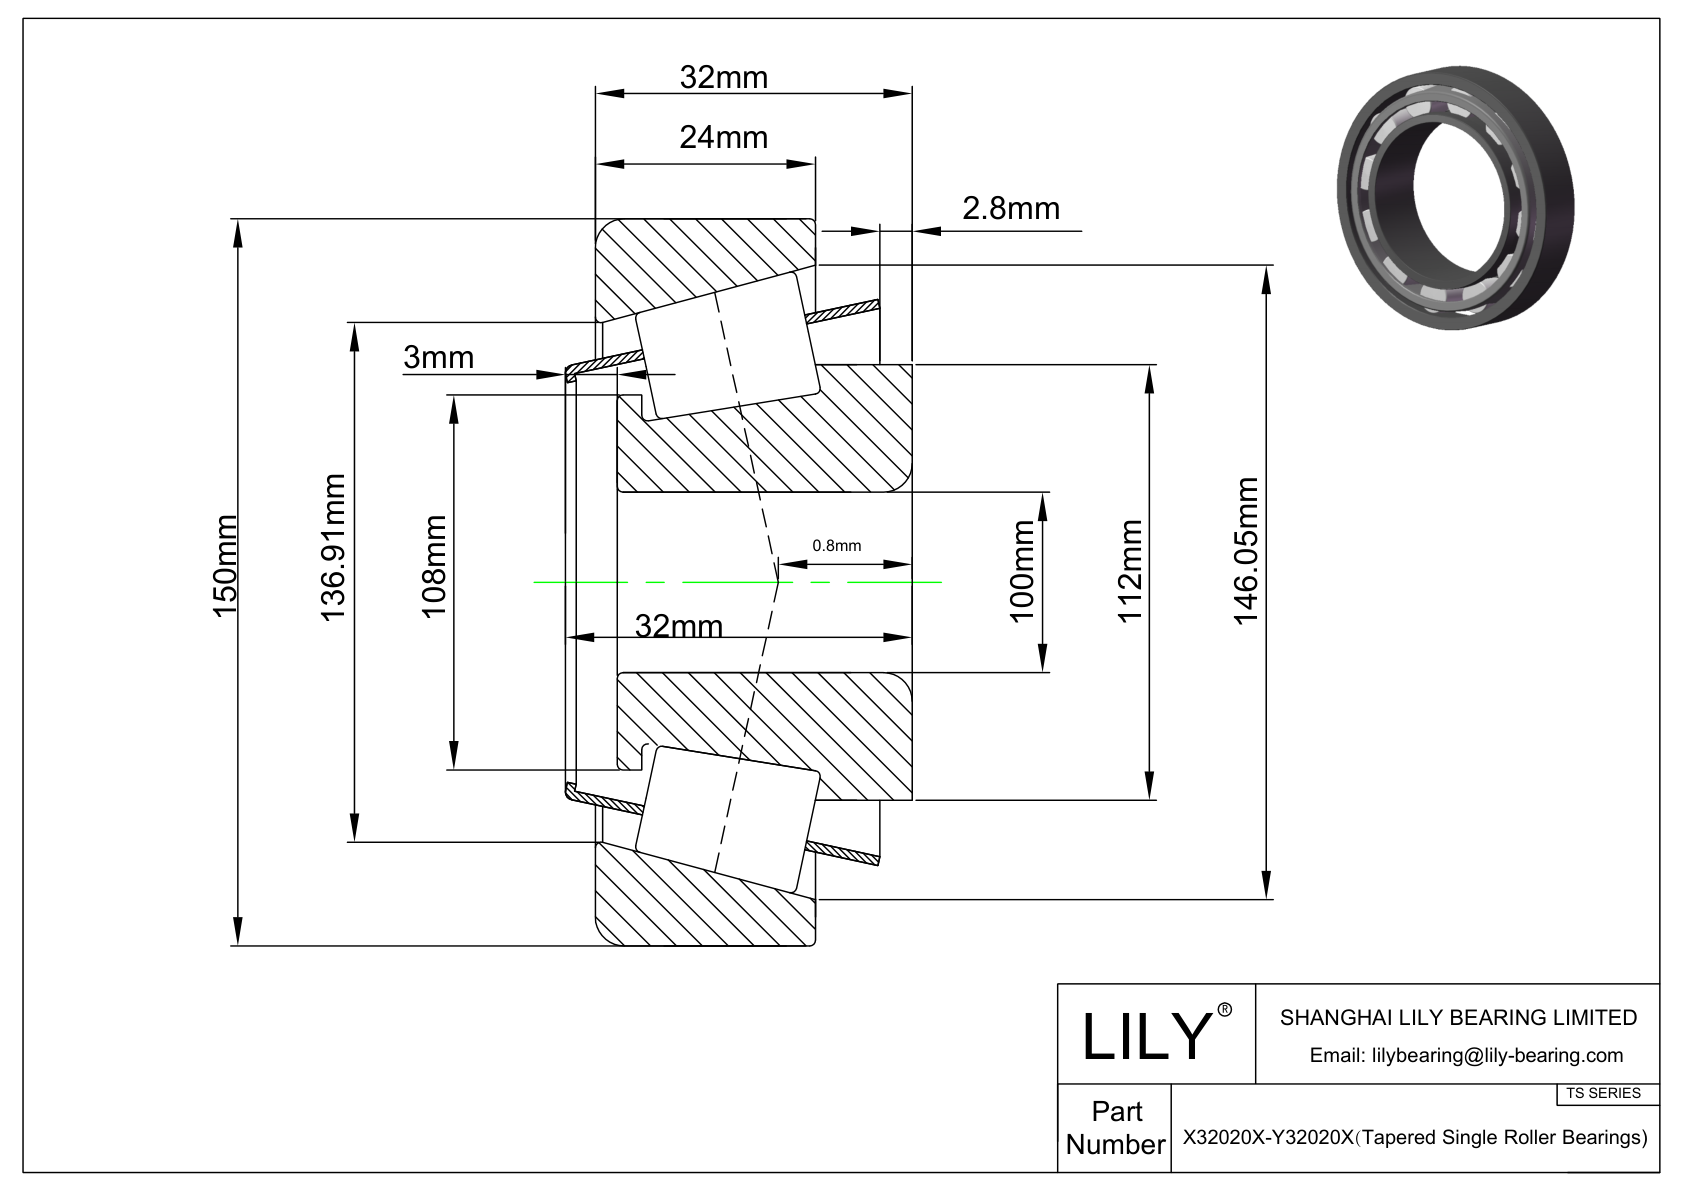 X32020X-Y32020X TS (Tapered Single Roller Bearings) (Metric) cad drawing